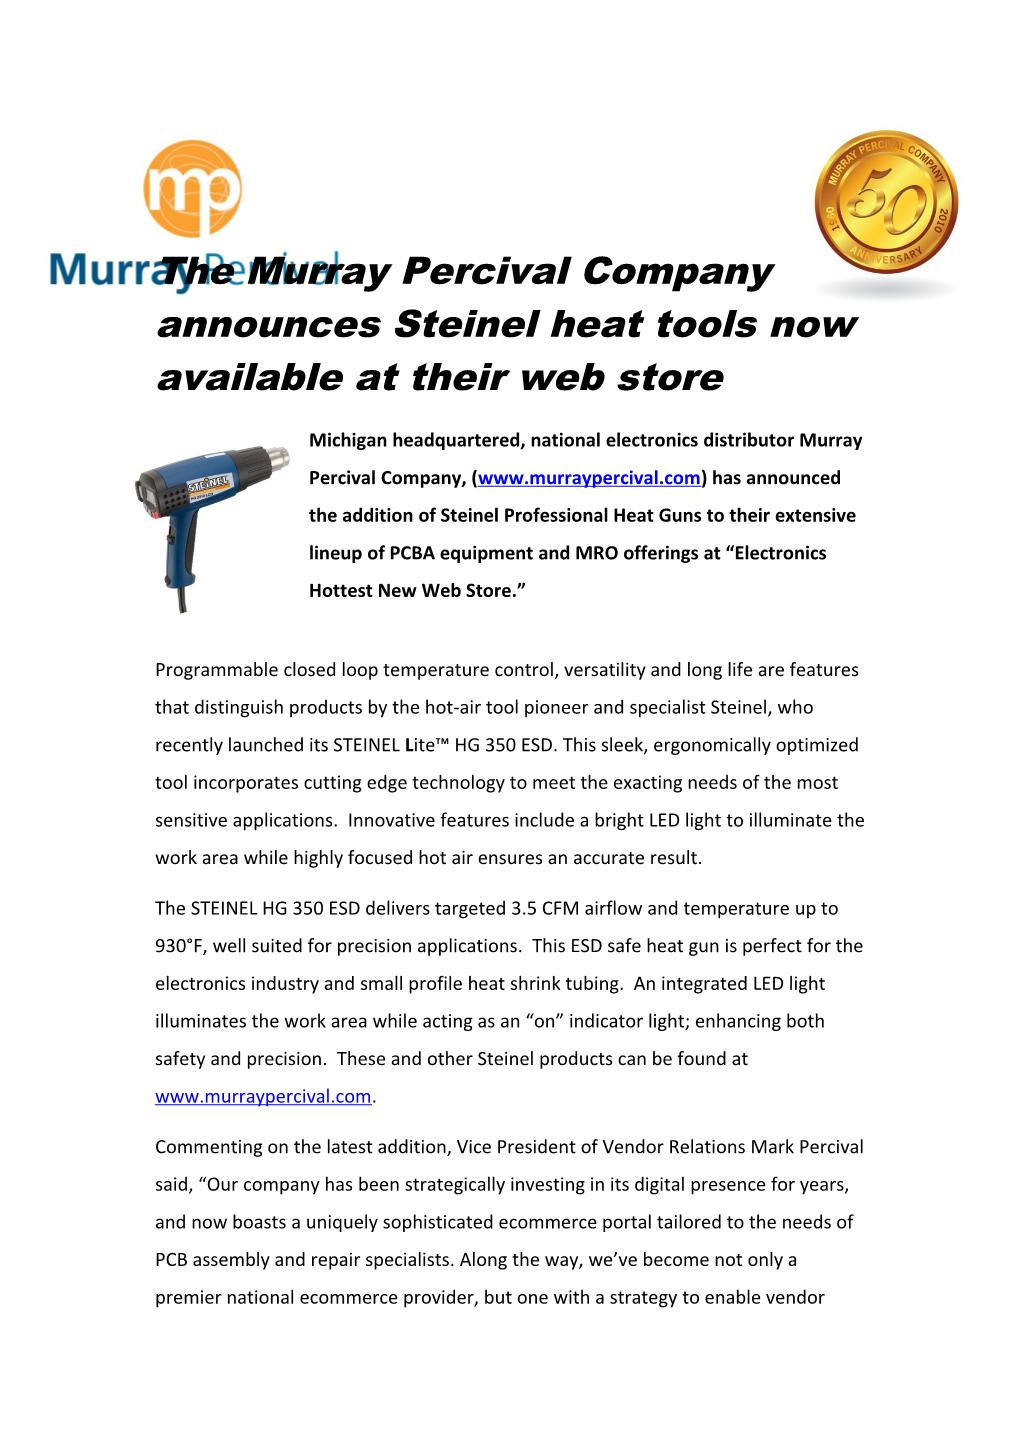 The Murray Percival Company Announces Steinel Heat Tools Now Available at Their Web Store